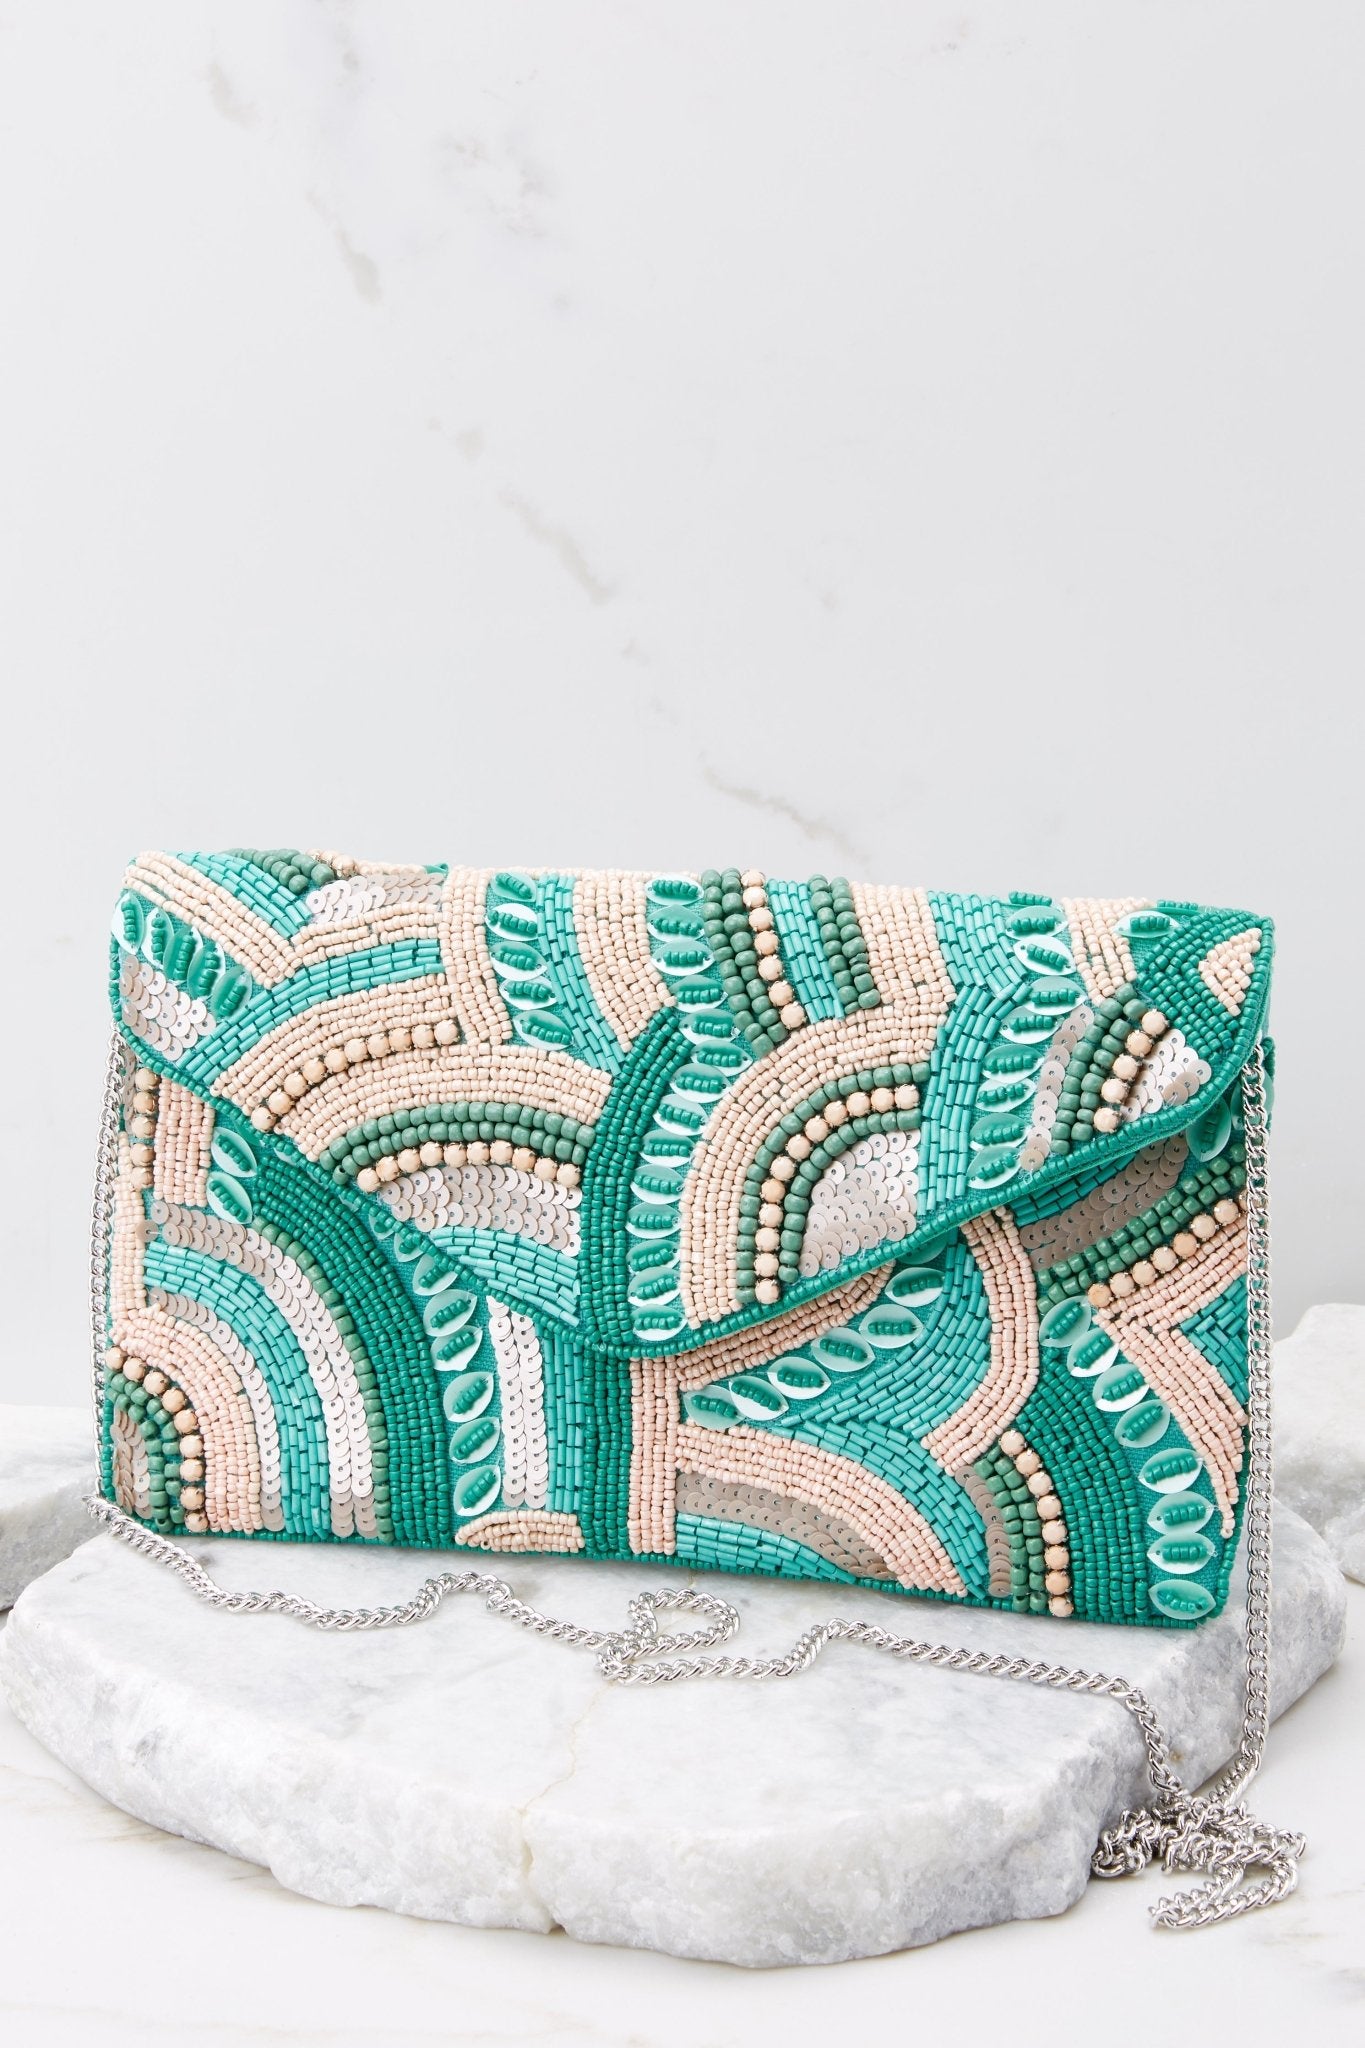 NEW Beaded Evening Clutch Handbag W/Chain Strap Turquoise Gold